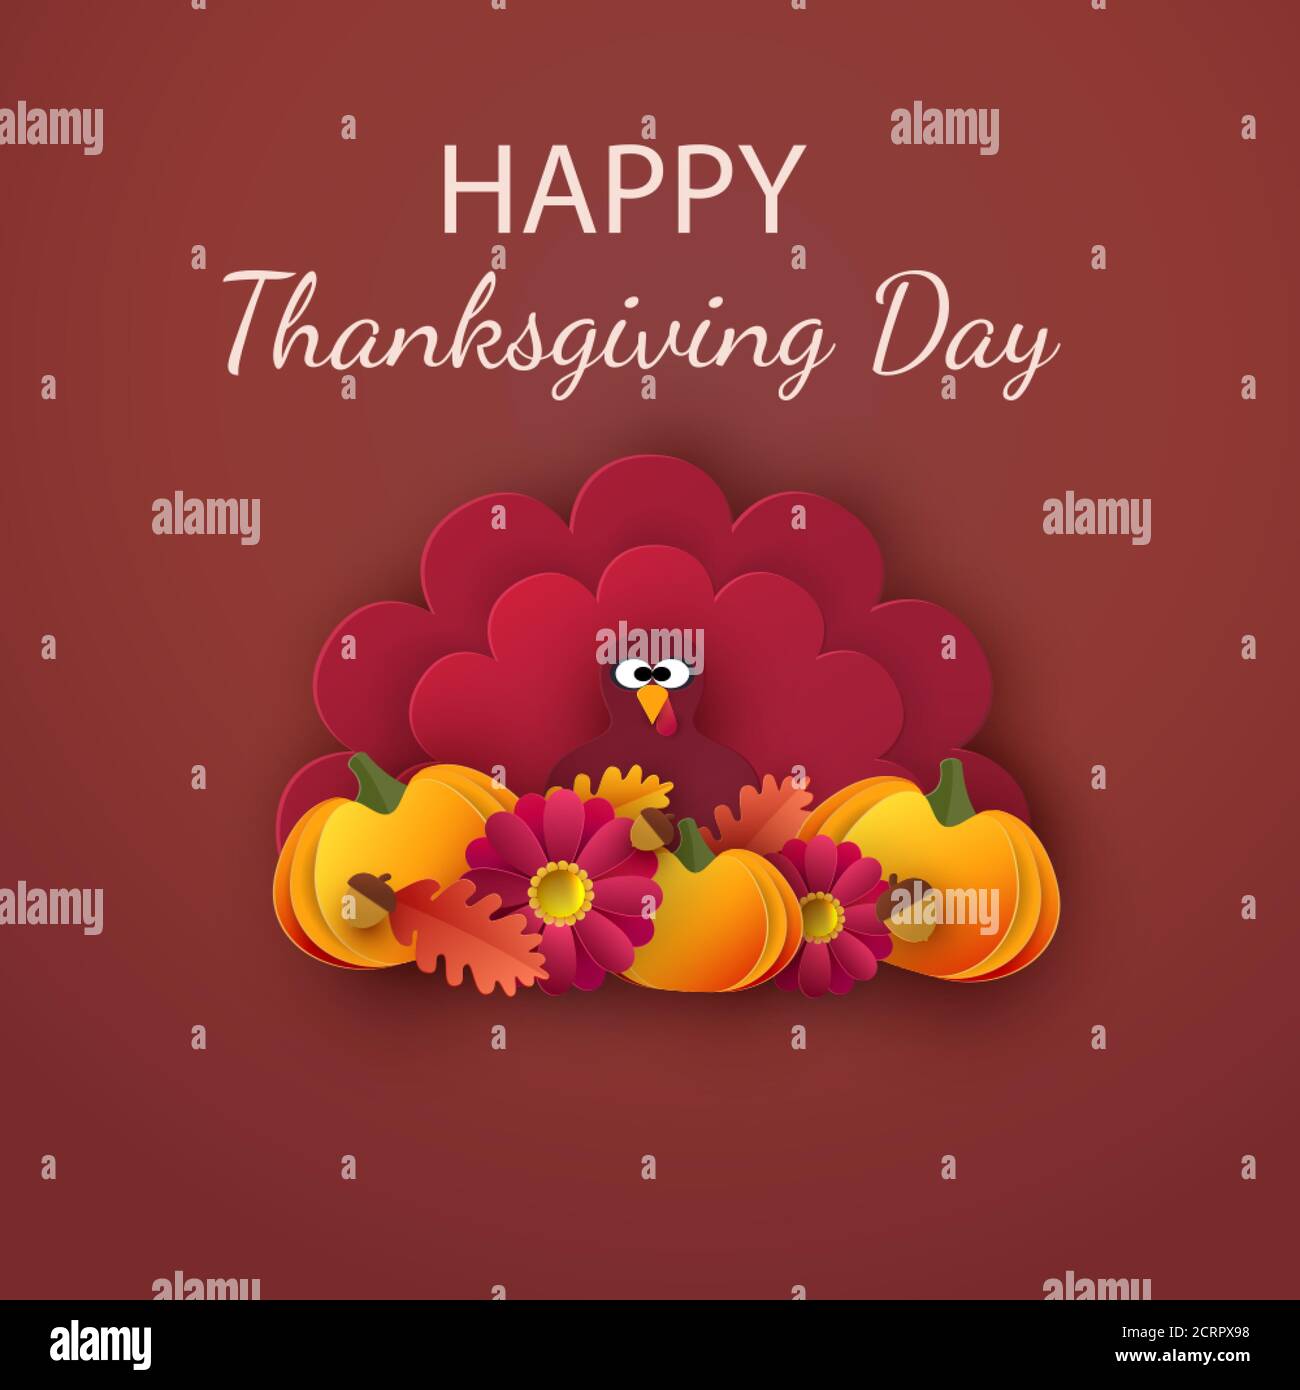 Happy Thanksgiving greeting card, poster, banner, flyer. Autumn background with leaves, acorns, pumpkin and cute cartoon turkey. Vector Stock Vector